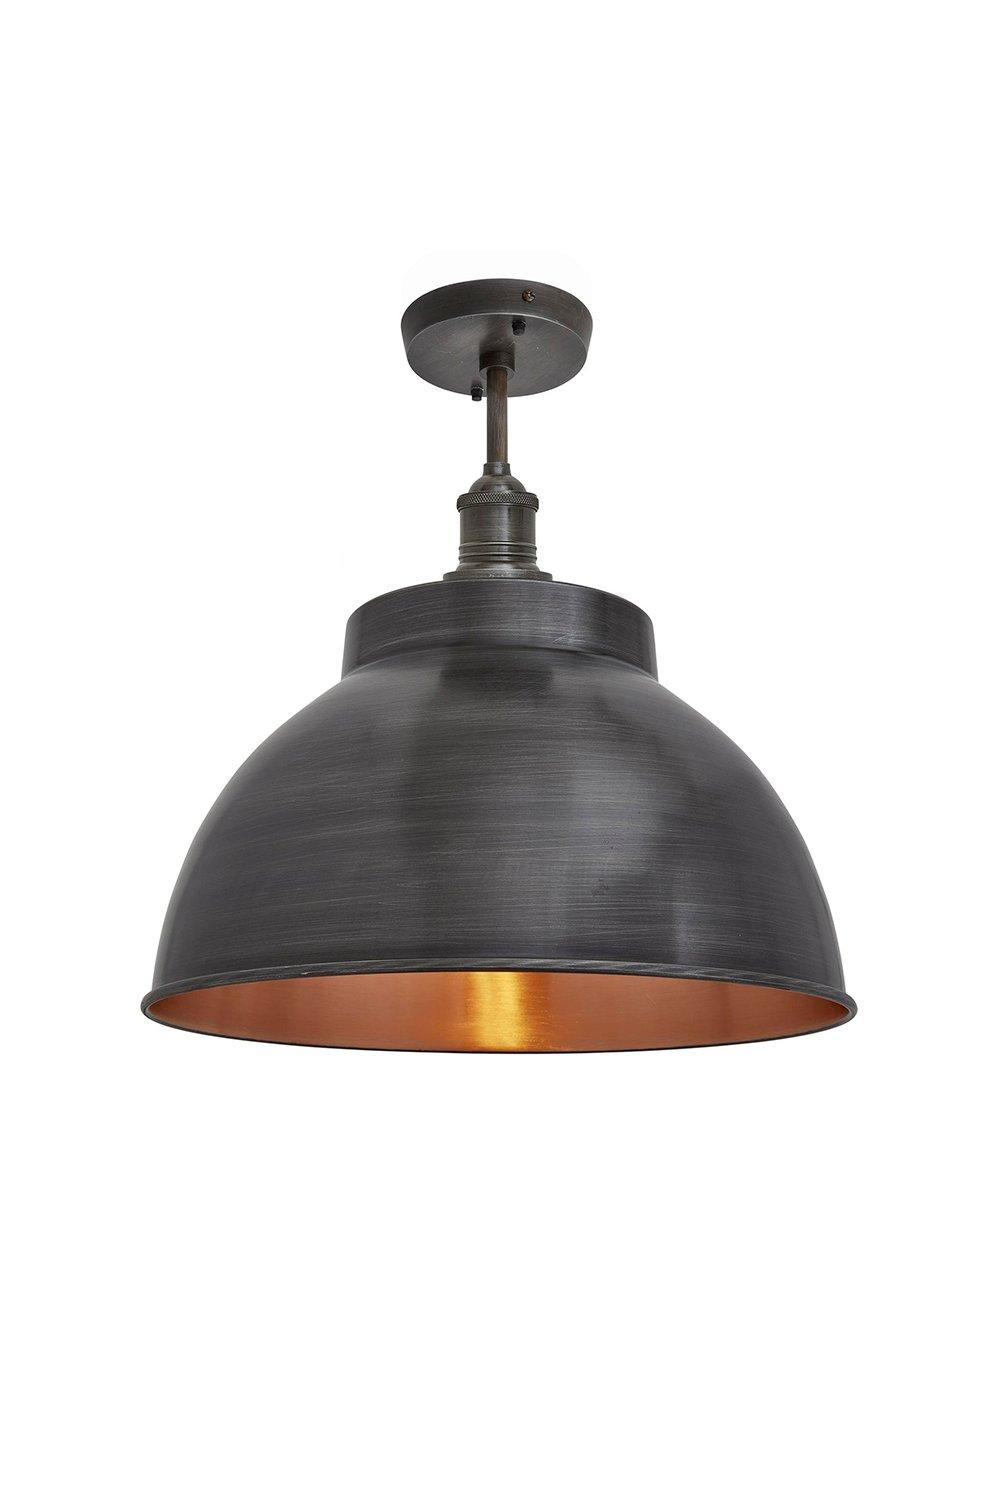 Brooklyn Dome Flush Mount, 13 Inch, Pewter & Copper, Pewter Holder